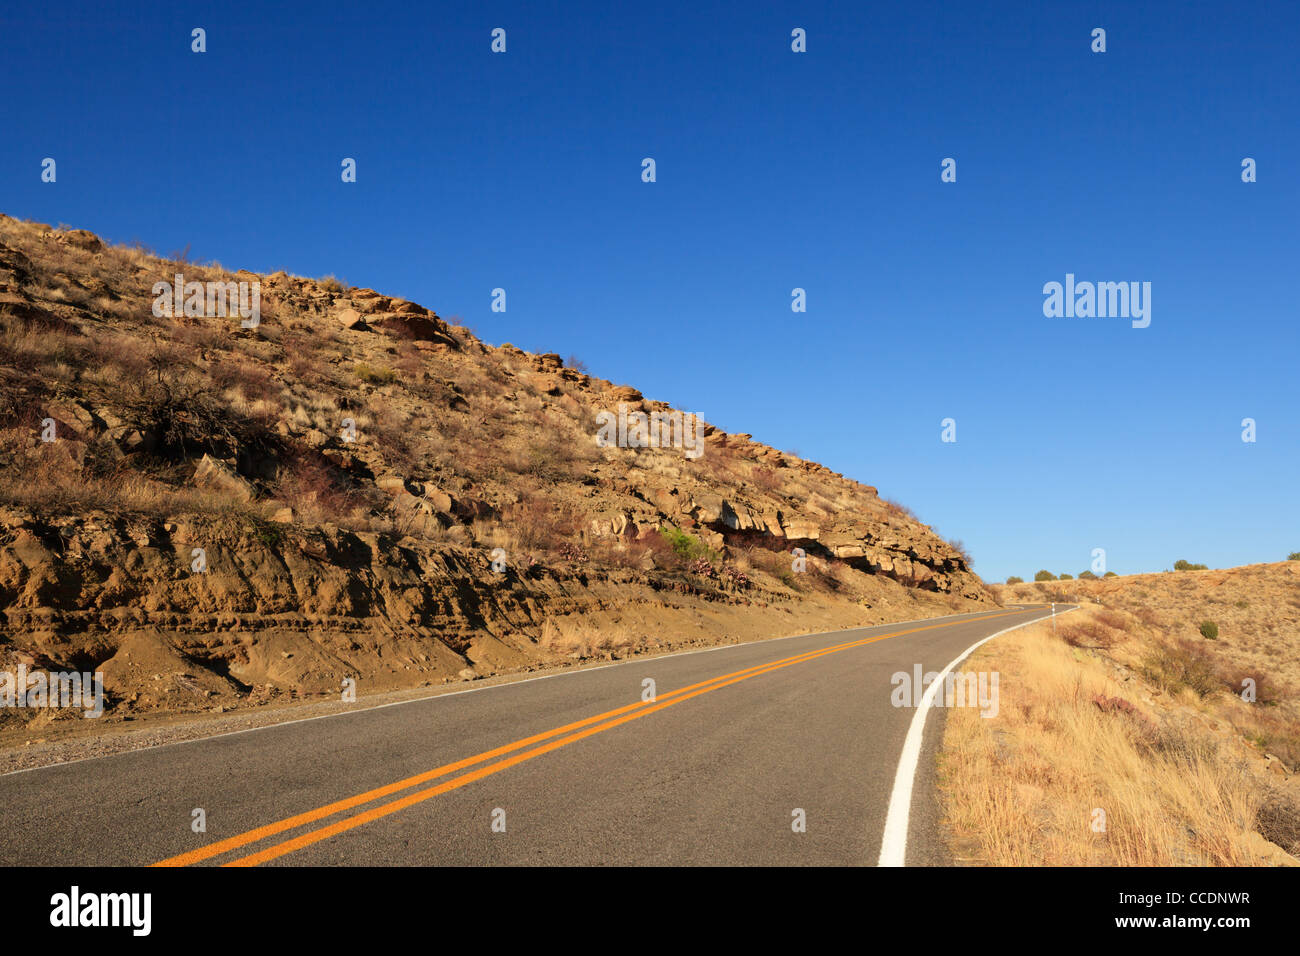 A rural highway in rugged New Mexico landscape. Stock Photo